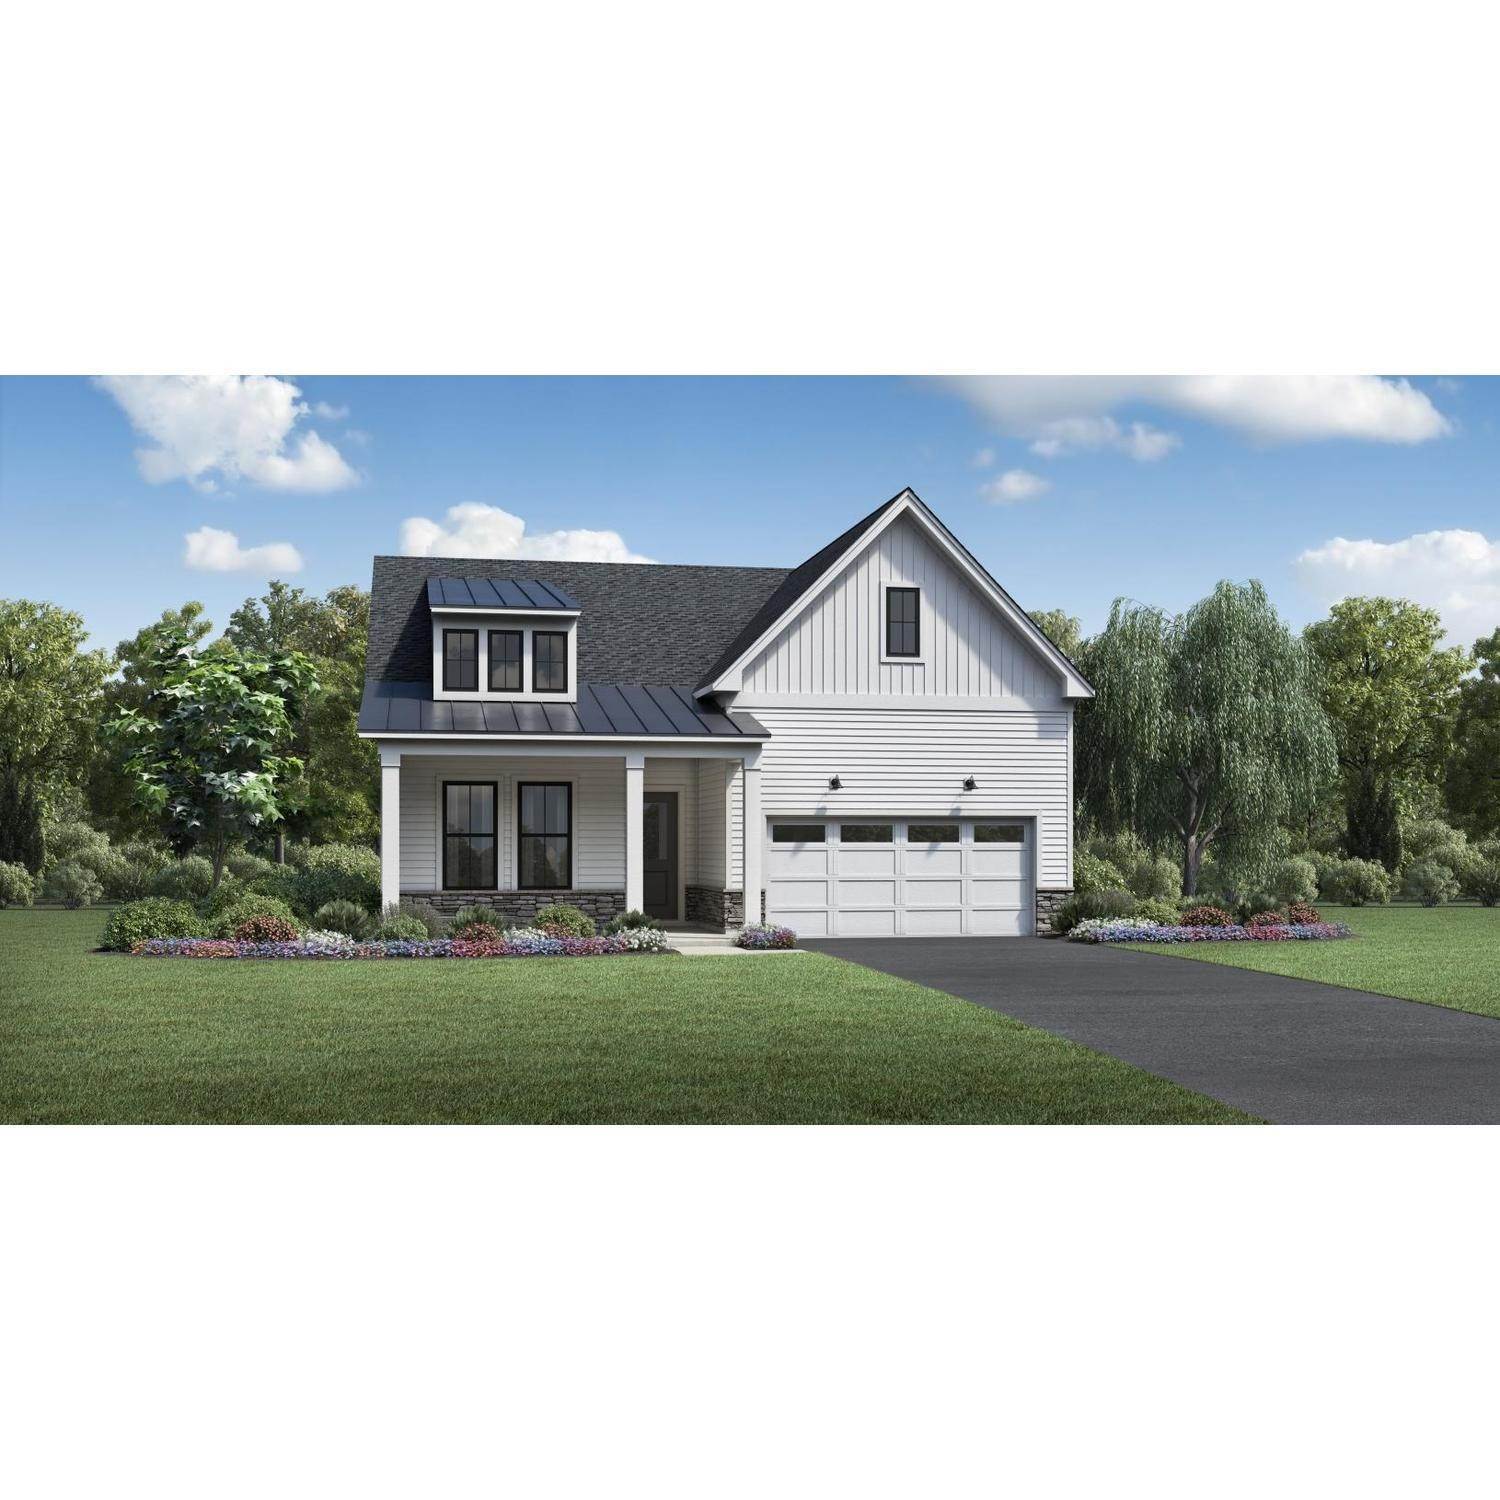 Single Family for Sale at Preserve At Marsh Creek - Regency Collection 5 Fetters Blvd, Downingtown, PA 19335